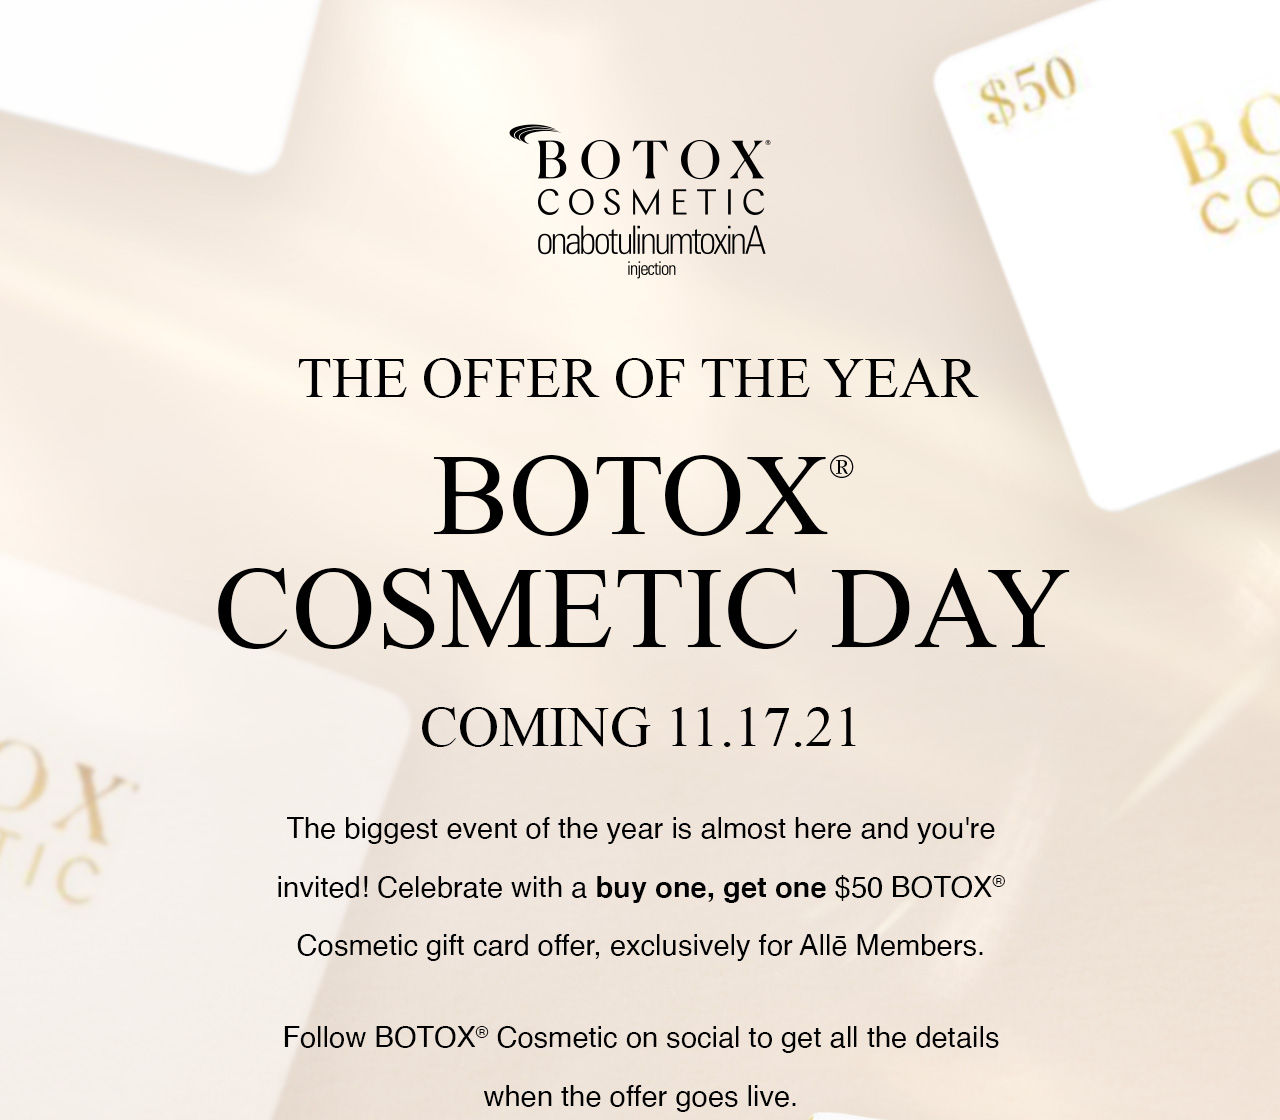 NATIONAL BOTOX DAY - Everything to Know to Access BEST Savings!